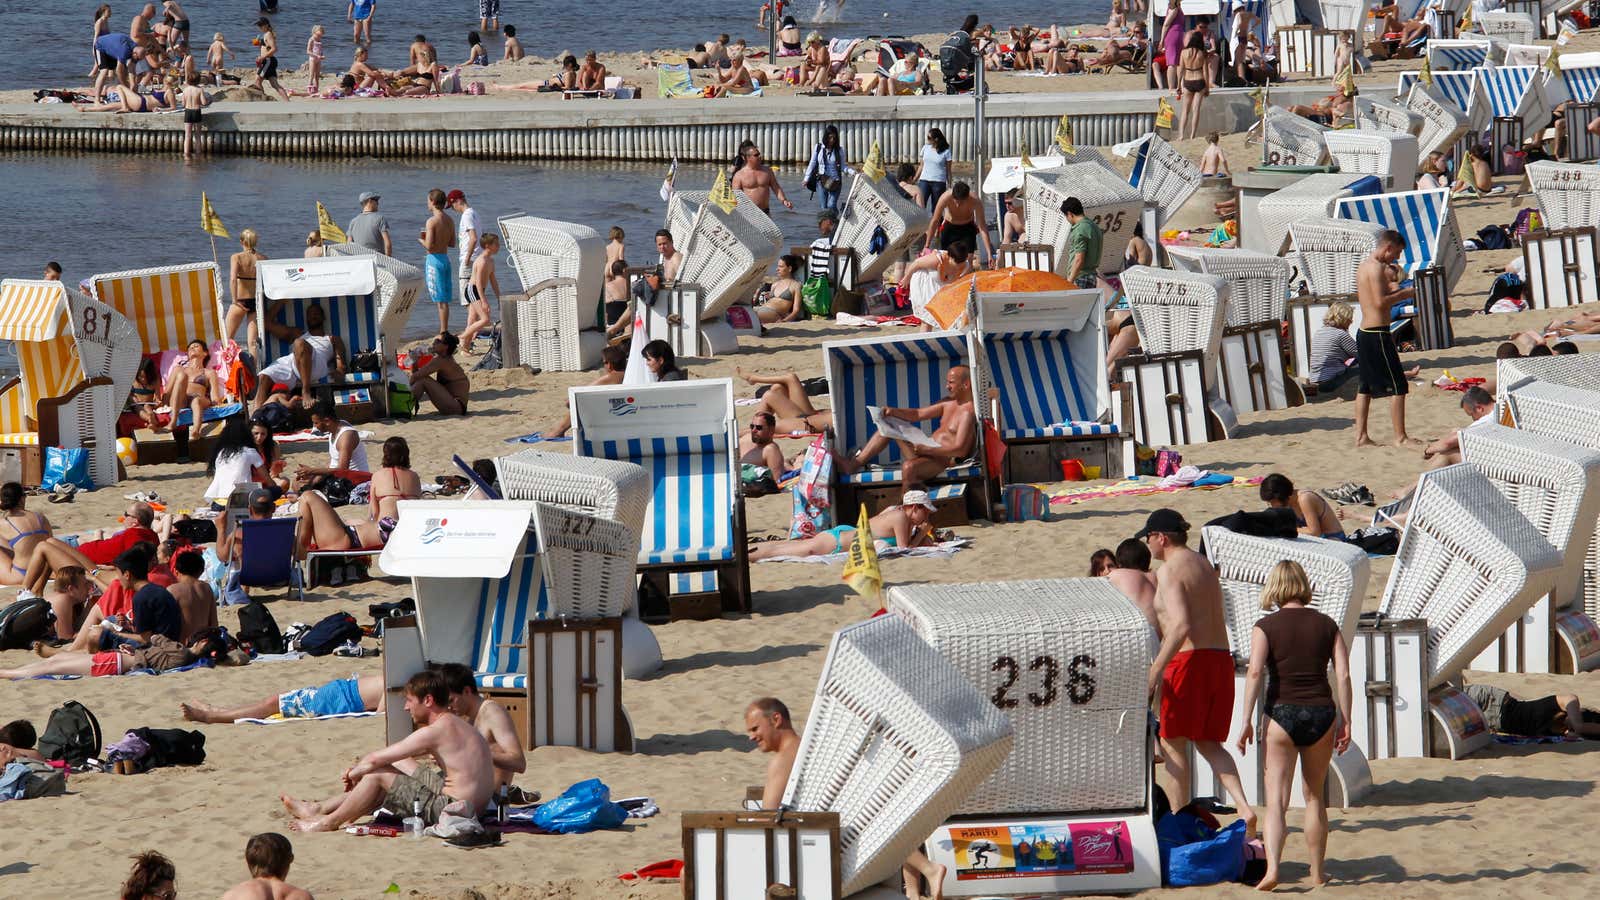 Germans Are No Longer The World Champions Of Nude Sunbathing